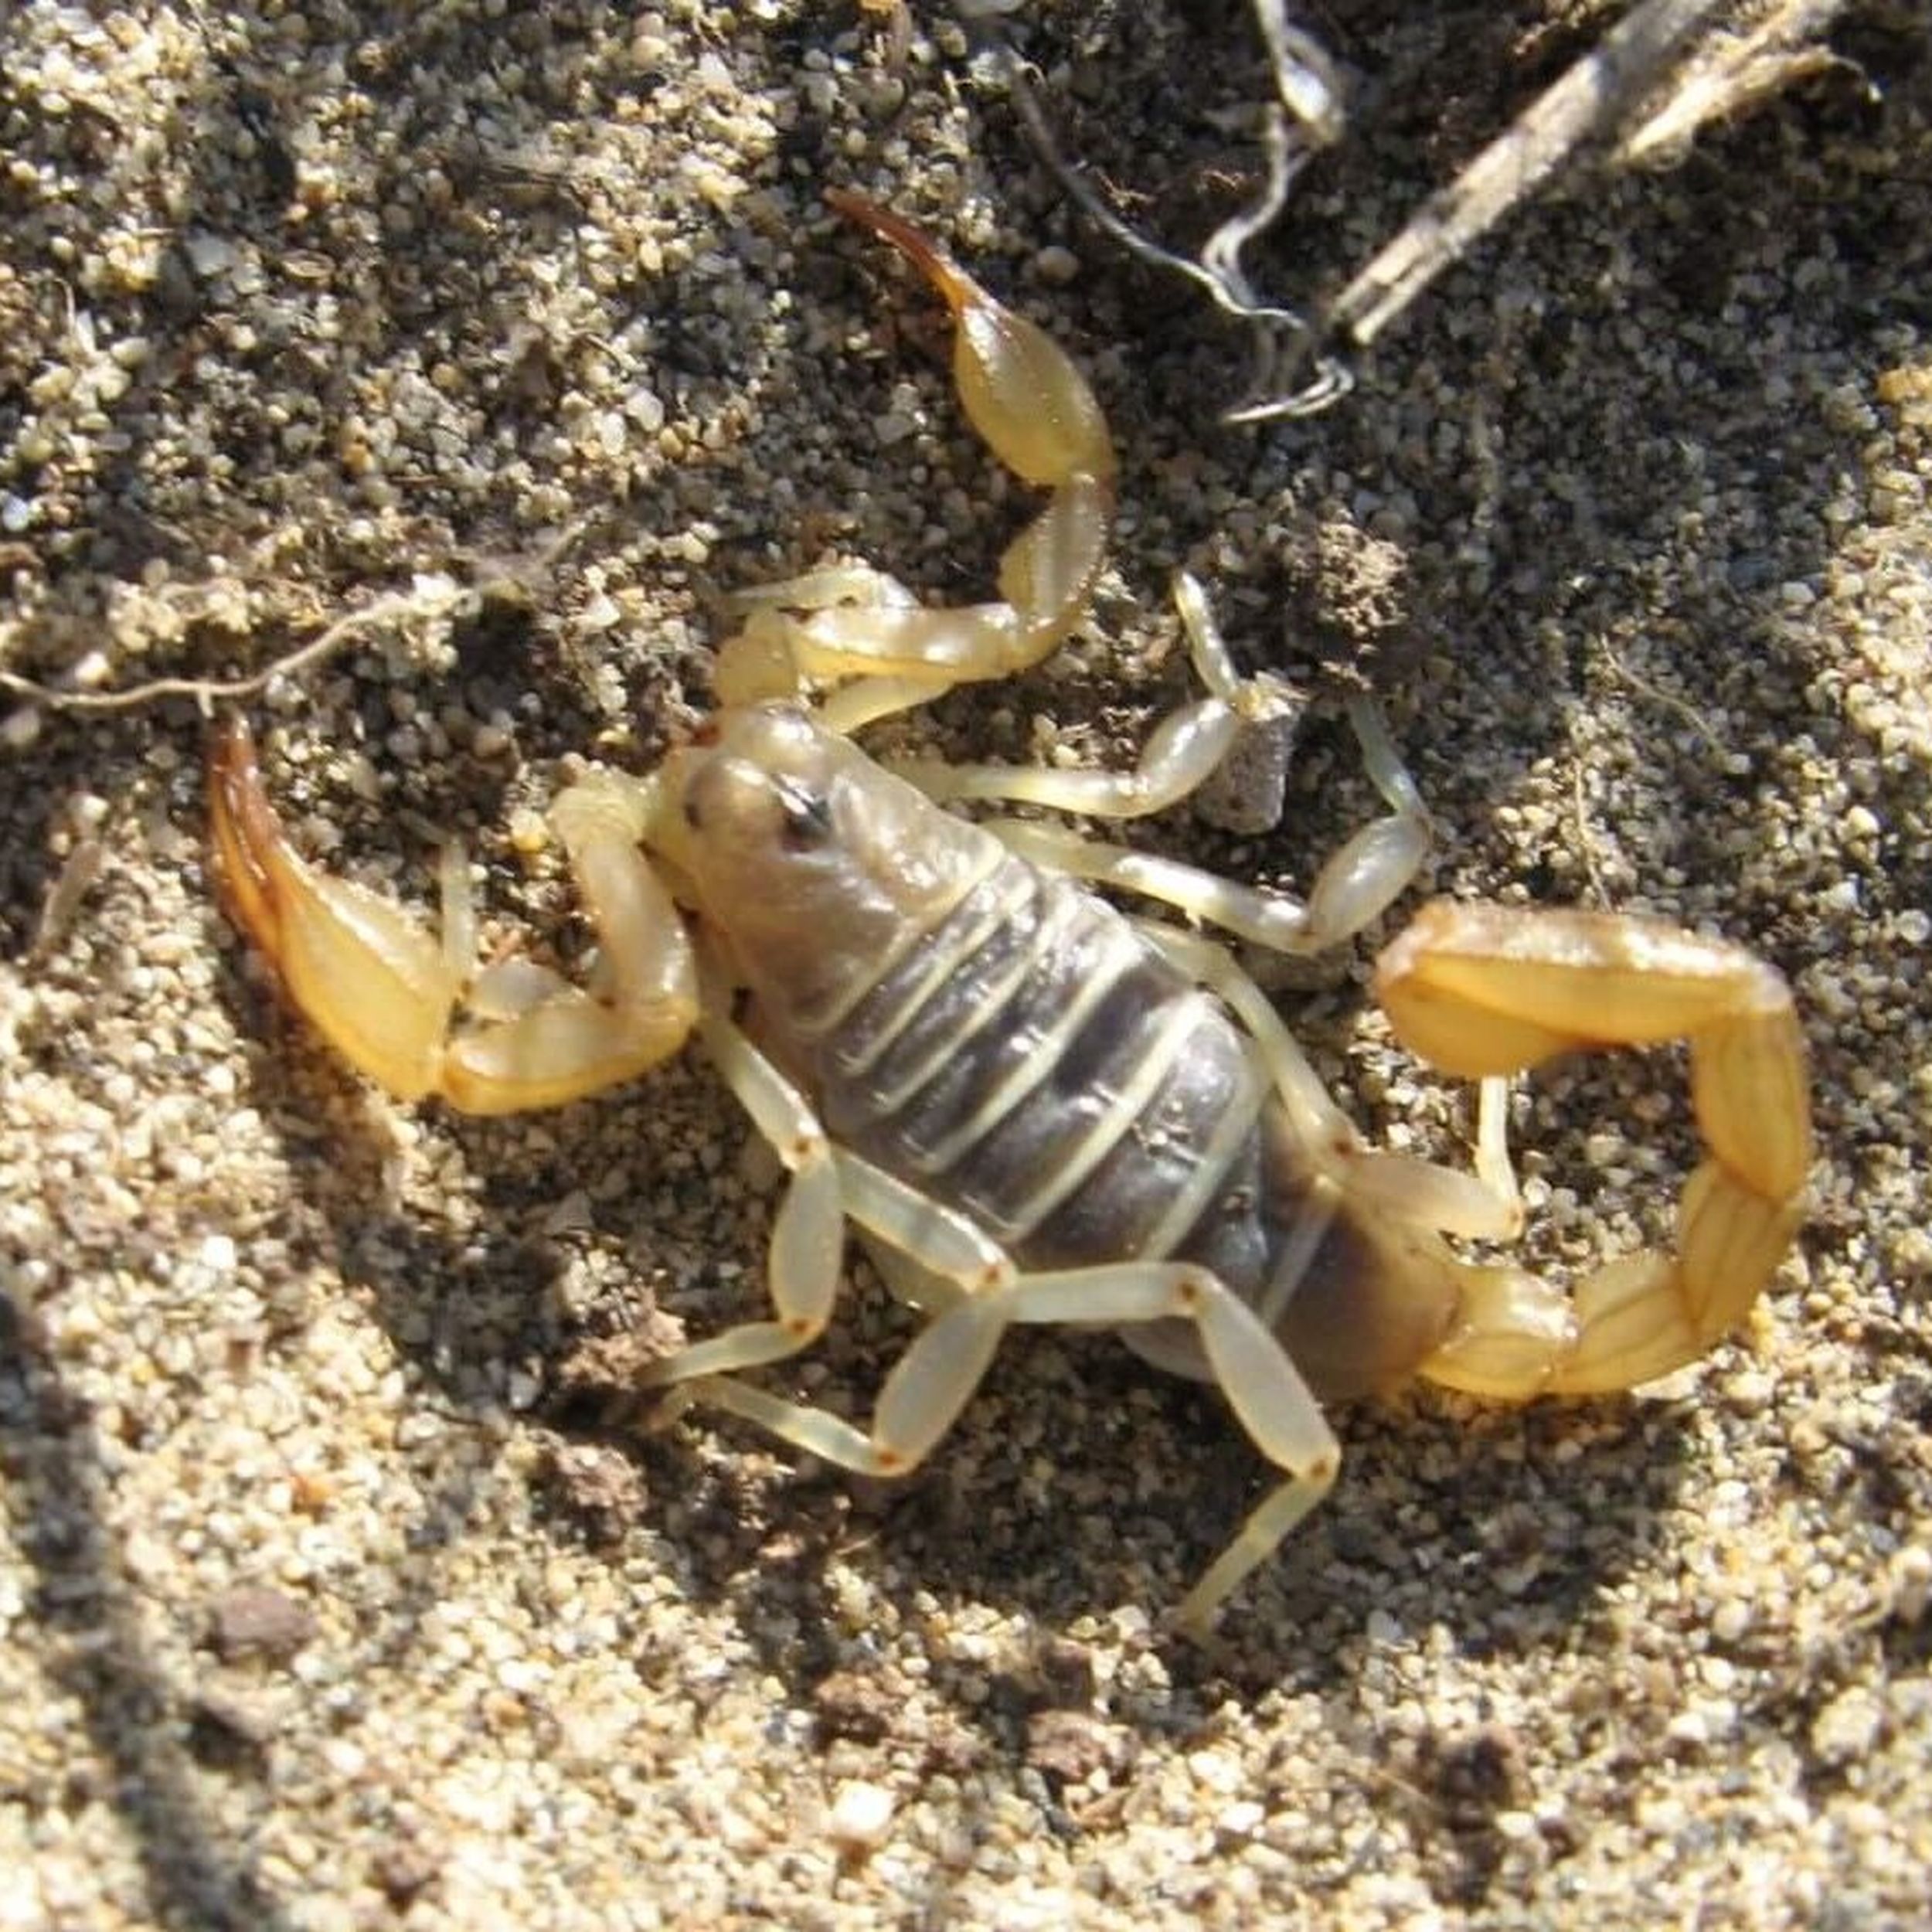 Did you know there are scorpions in the Columbia River Gorge?